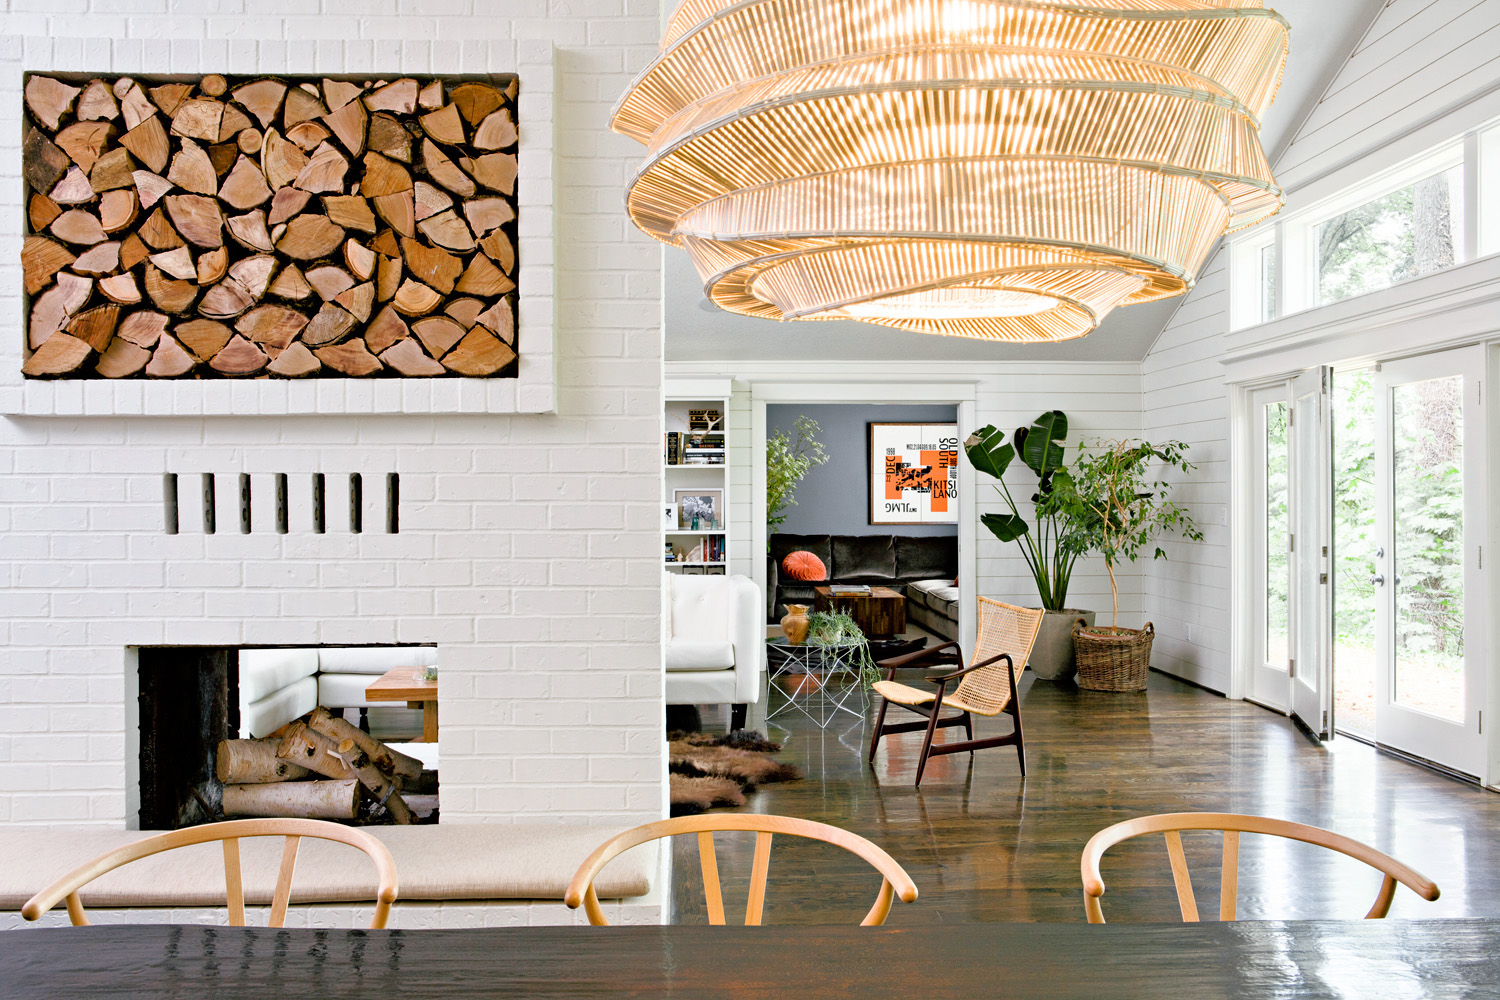 11 Chic Ideas for Fireplaces